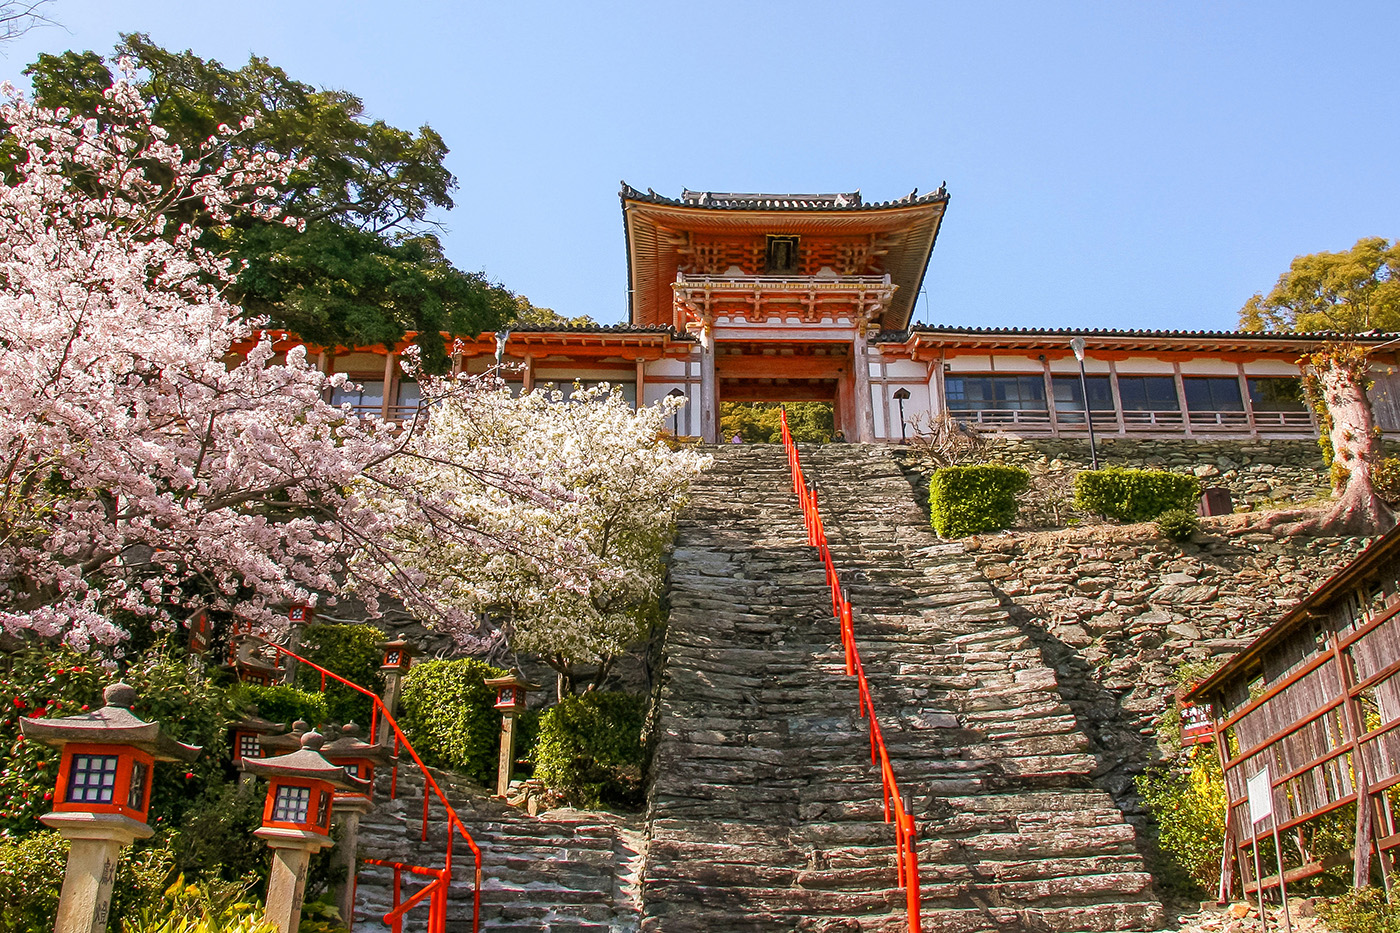 Wakayama's Wakaura Tenmangu Shrine comes alive with the arrival of cherry blossoms, offering a blend of cultural richness and natural splendour